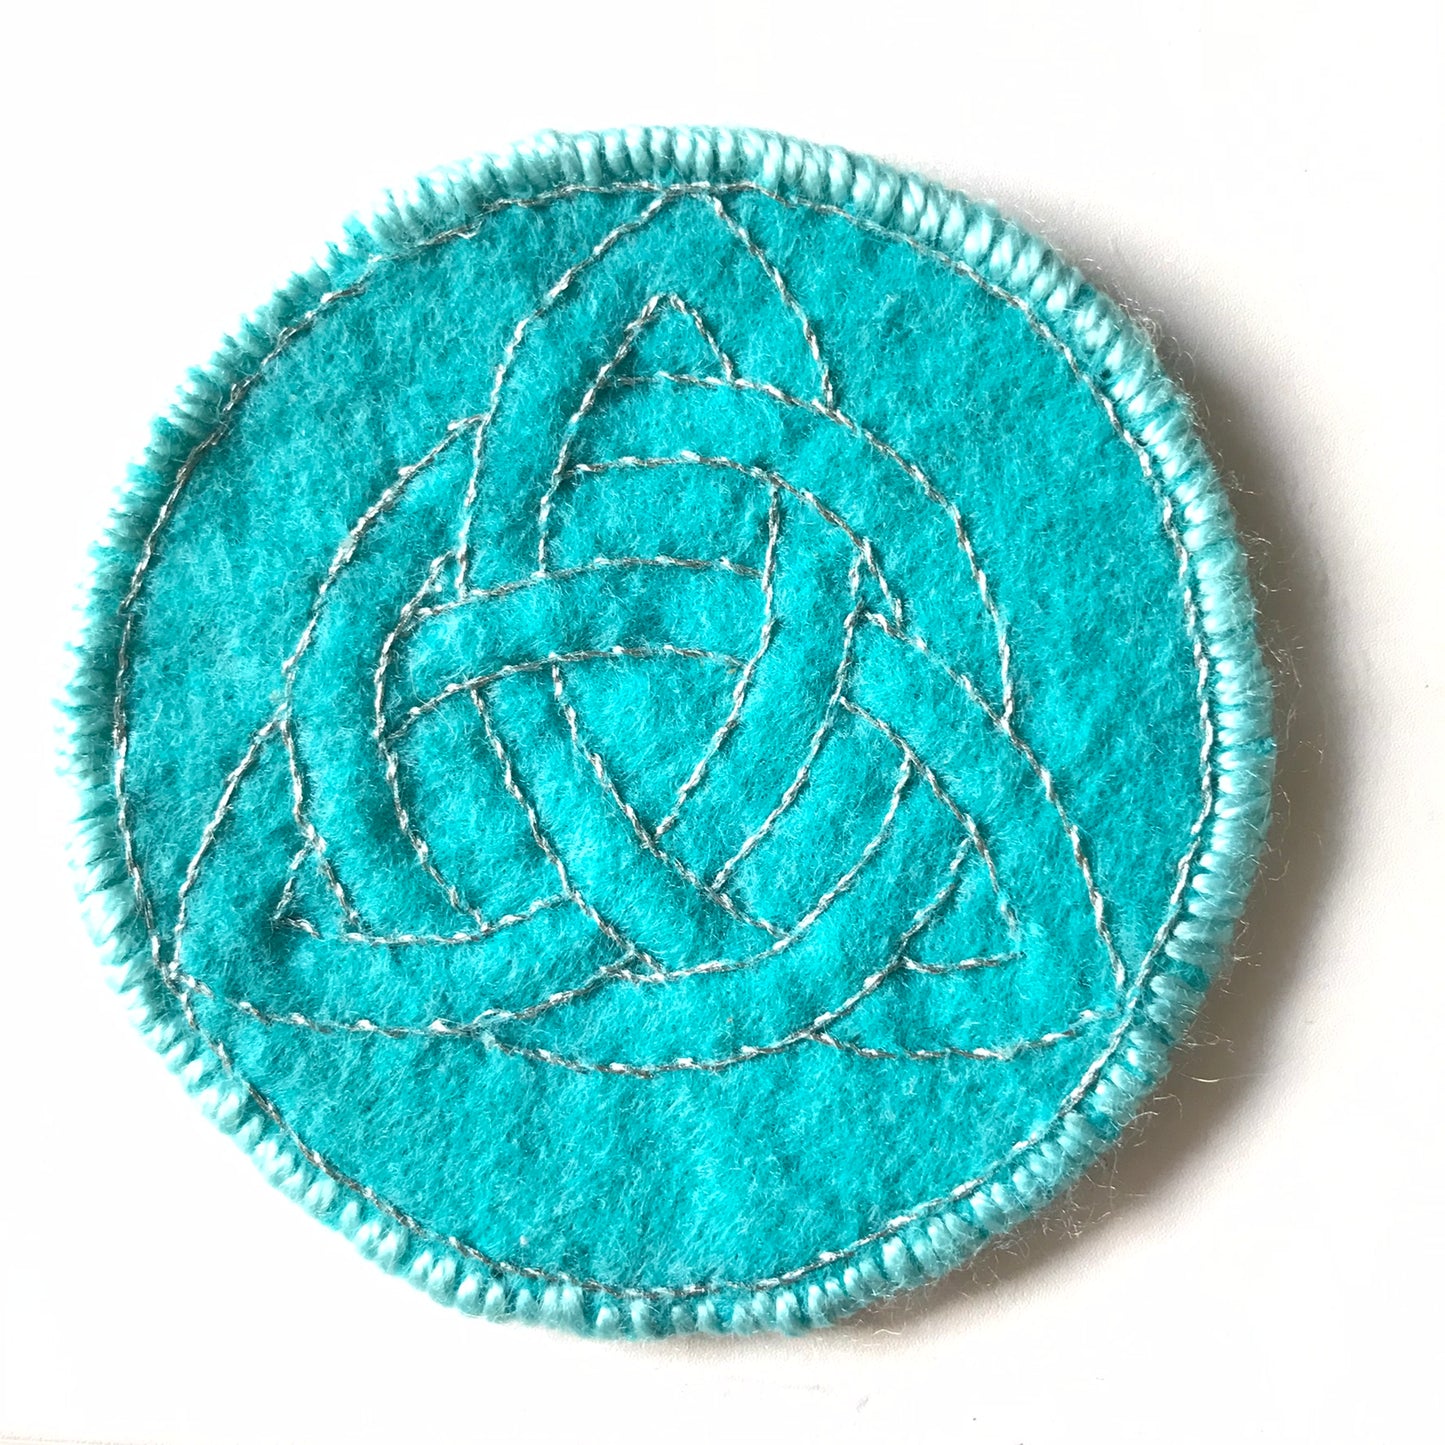 TRIQUETRA, TURQUOISE FELT & SILVER METAL THREAD EMBROIDERED PROTECTION PATCHES, MINI TRAVEL CRYSTAL CHARGERS, ALTER PIECES